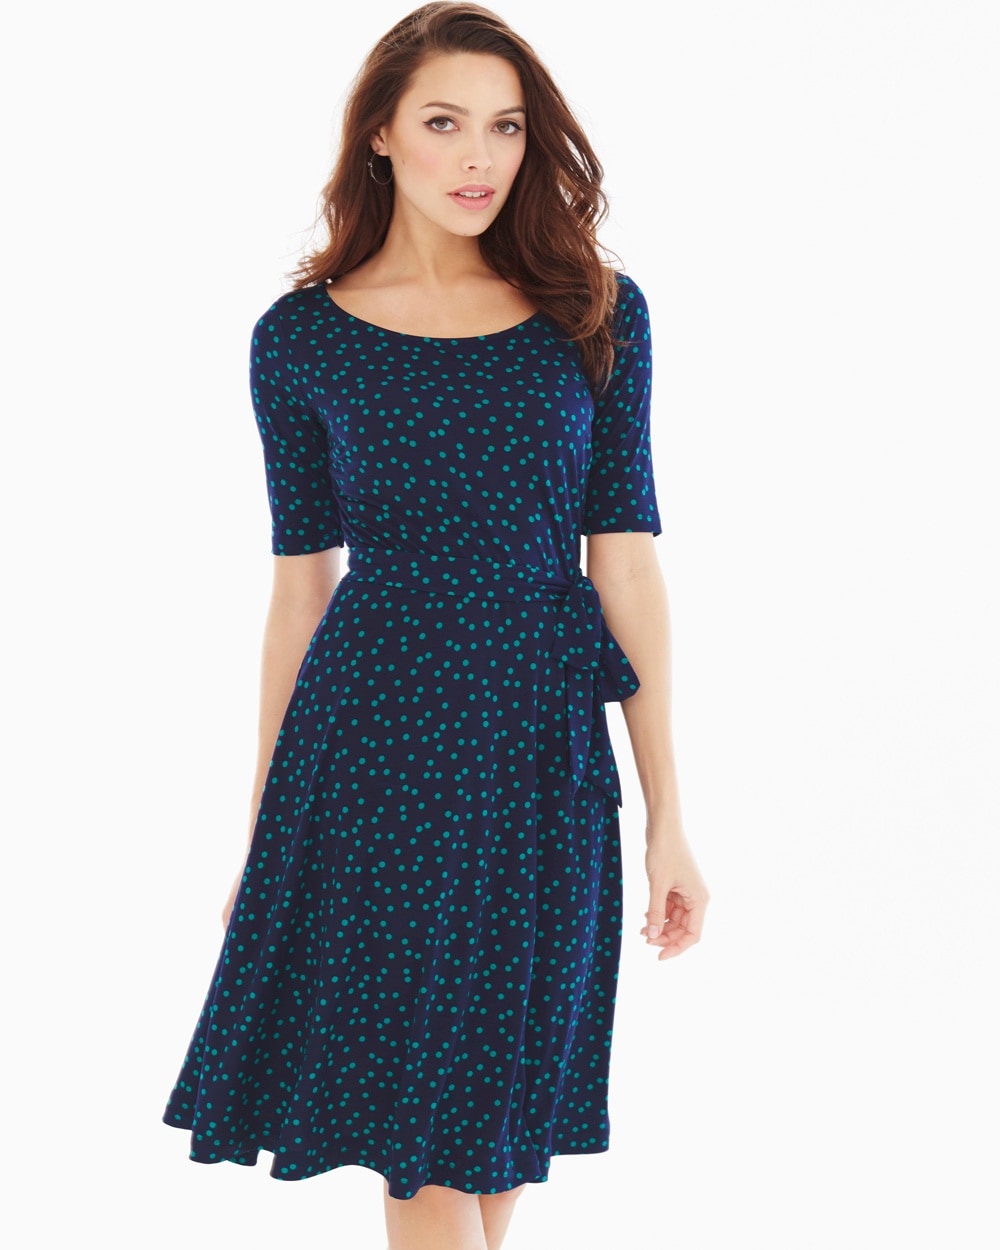 Elbow Sleeve Fit and Flare Dress Wishful Dot Navy